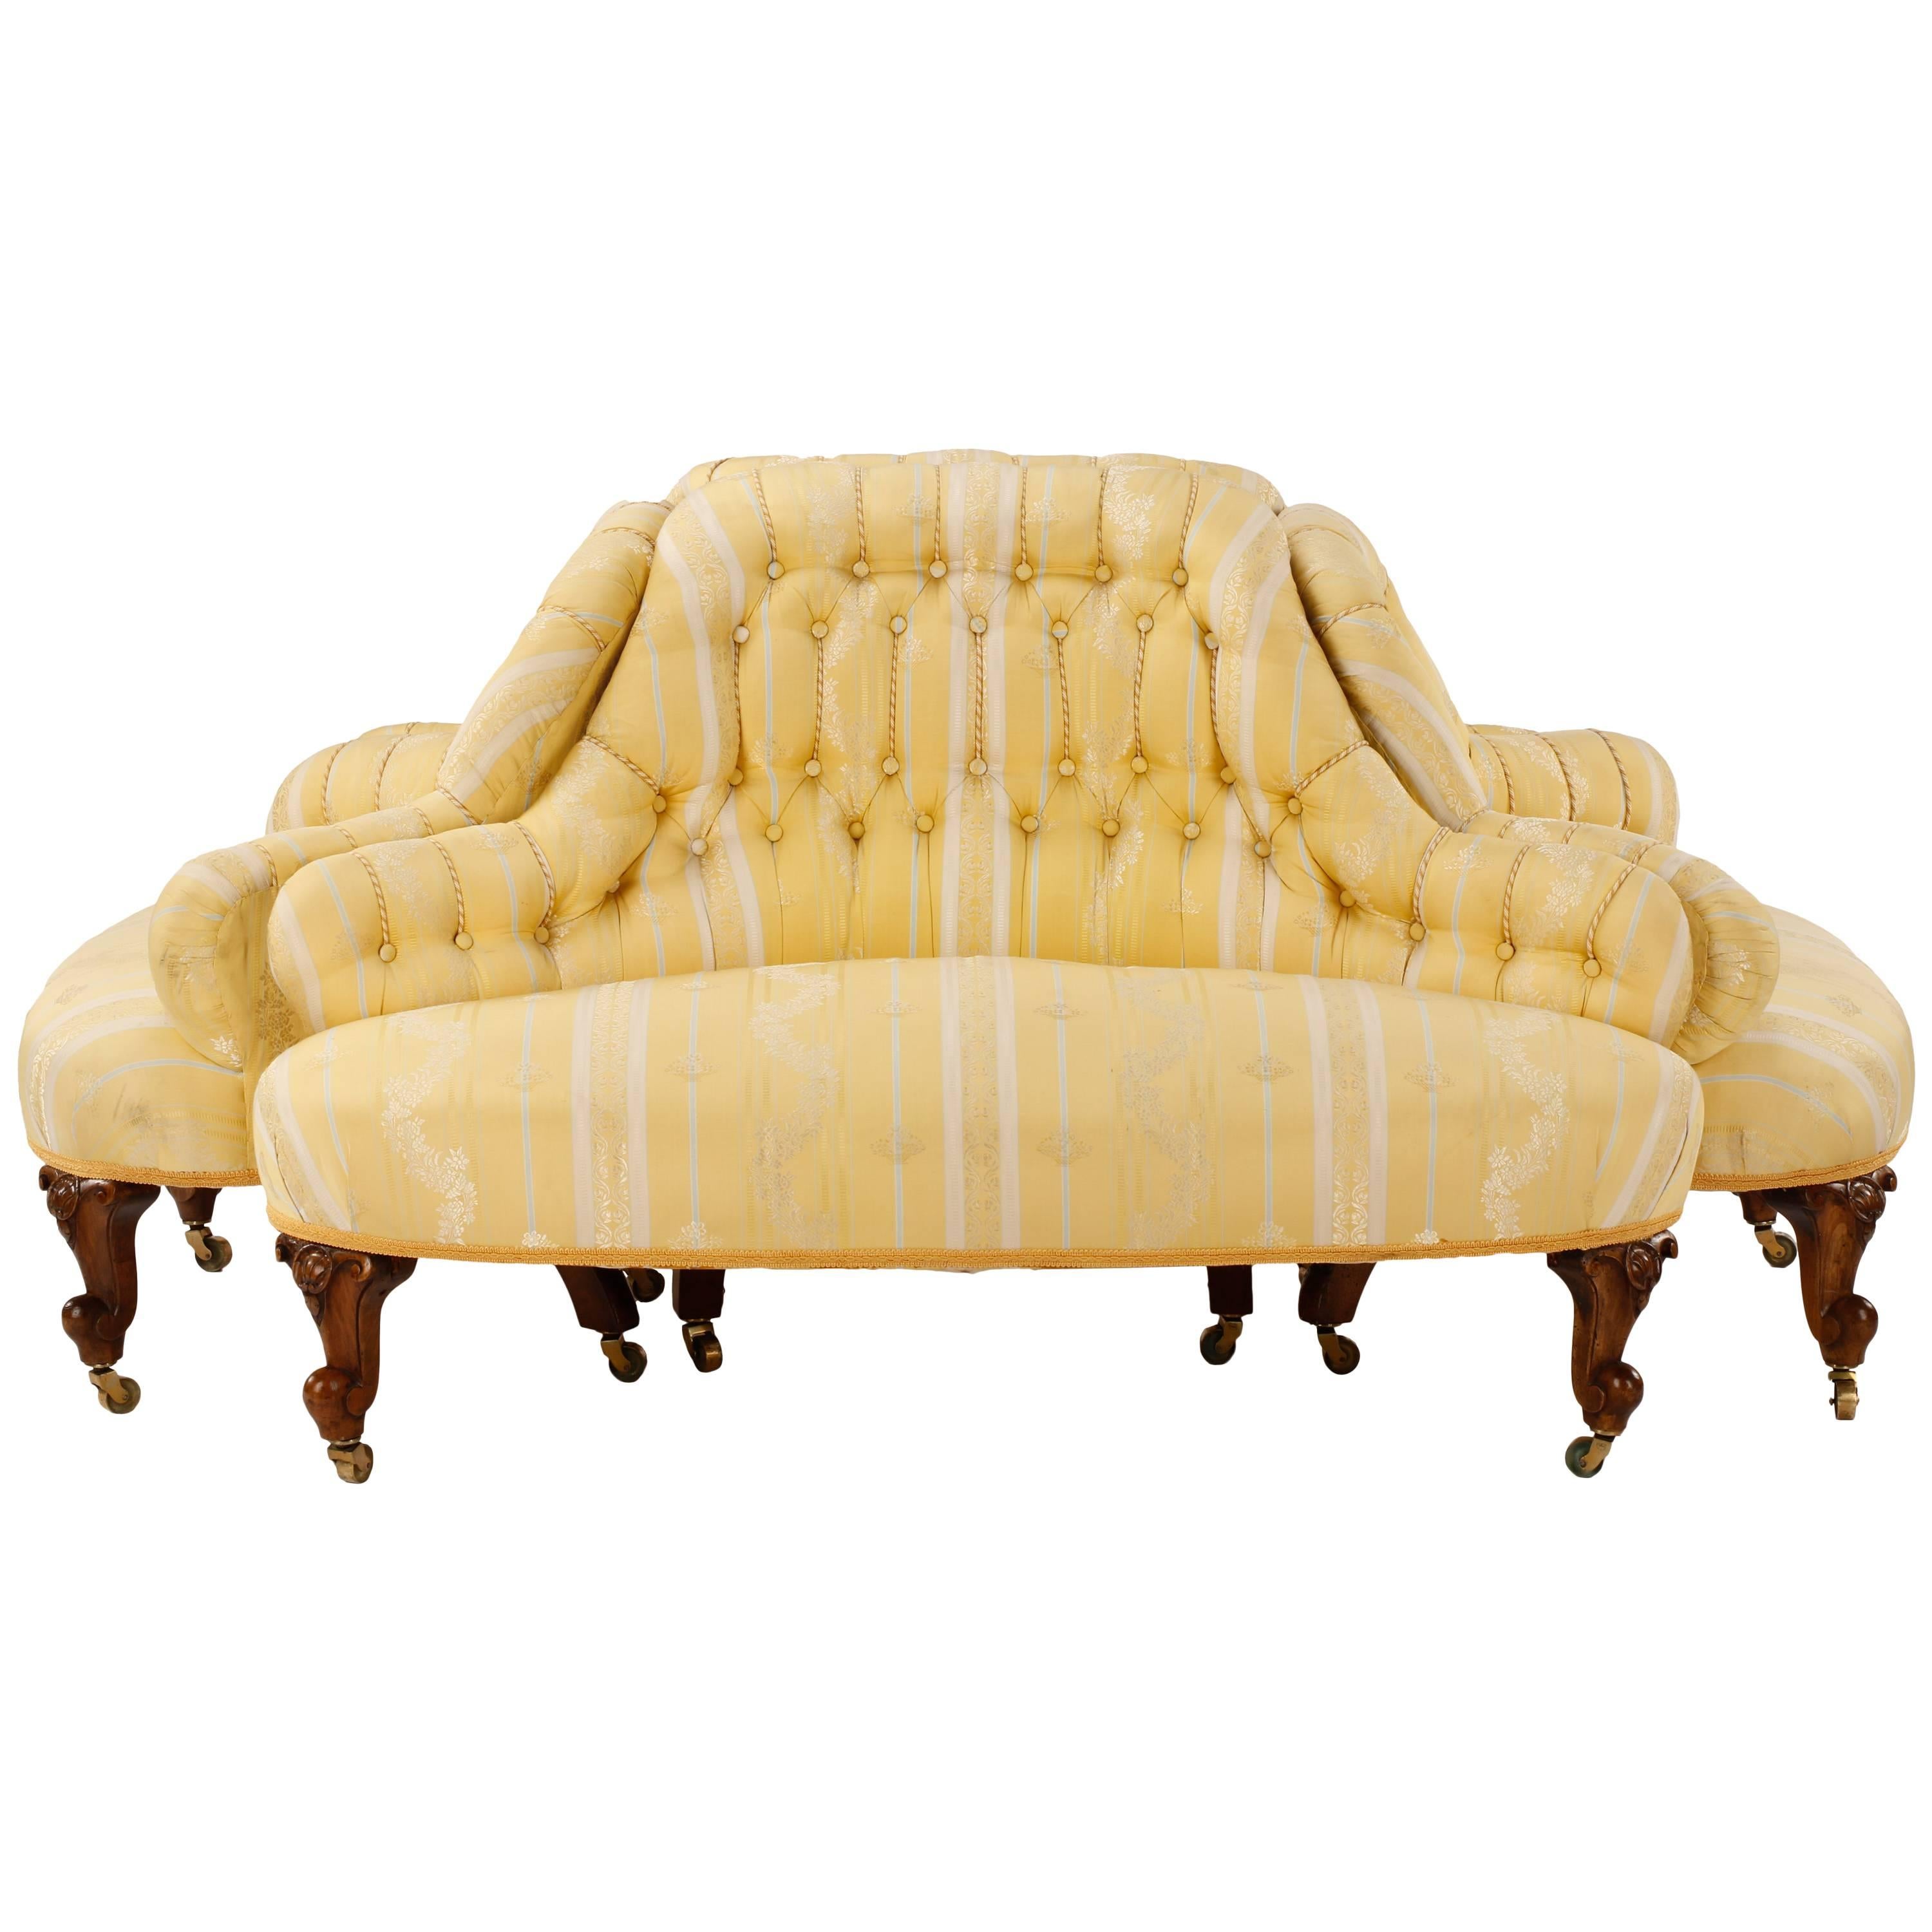 19th Century Upholstered Four-Part "Borne Settee" or Round Sofa